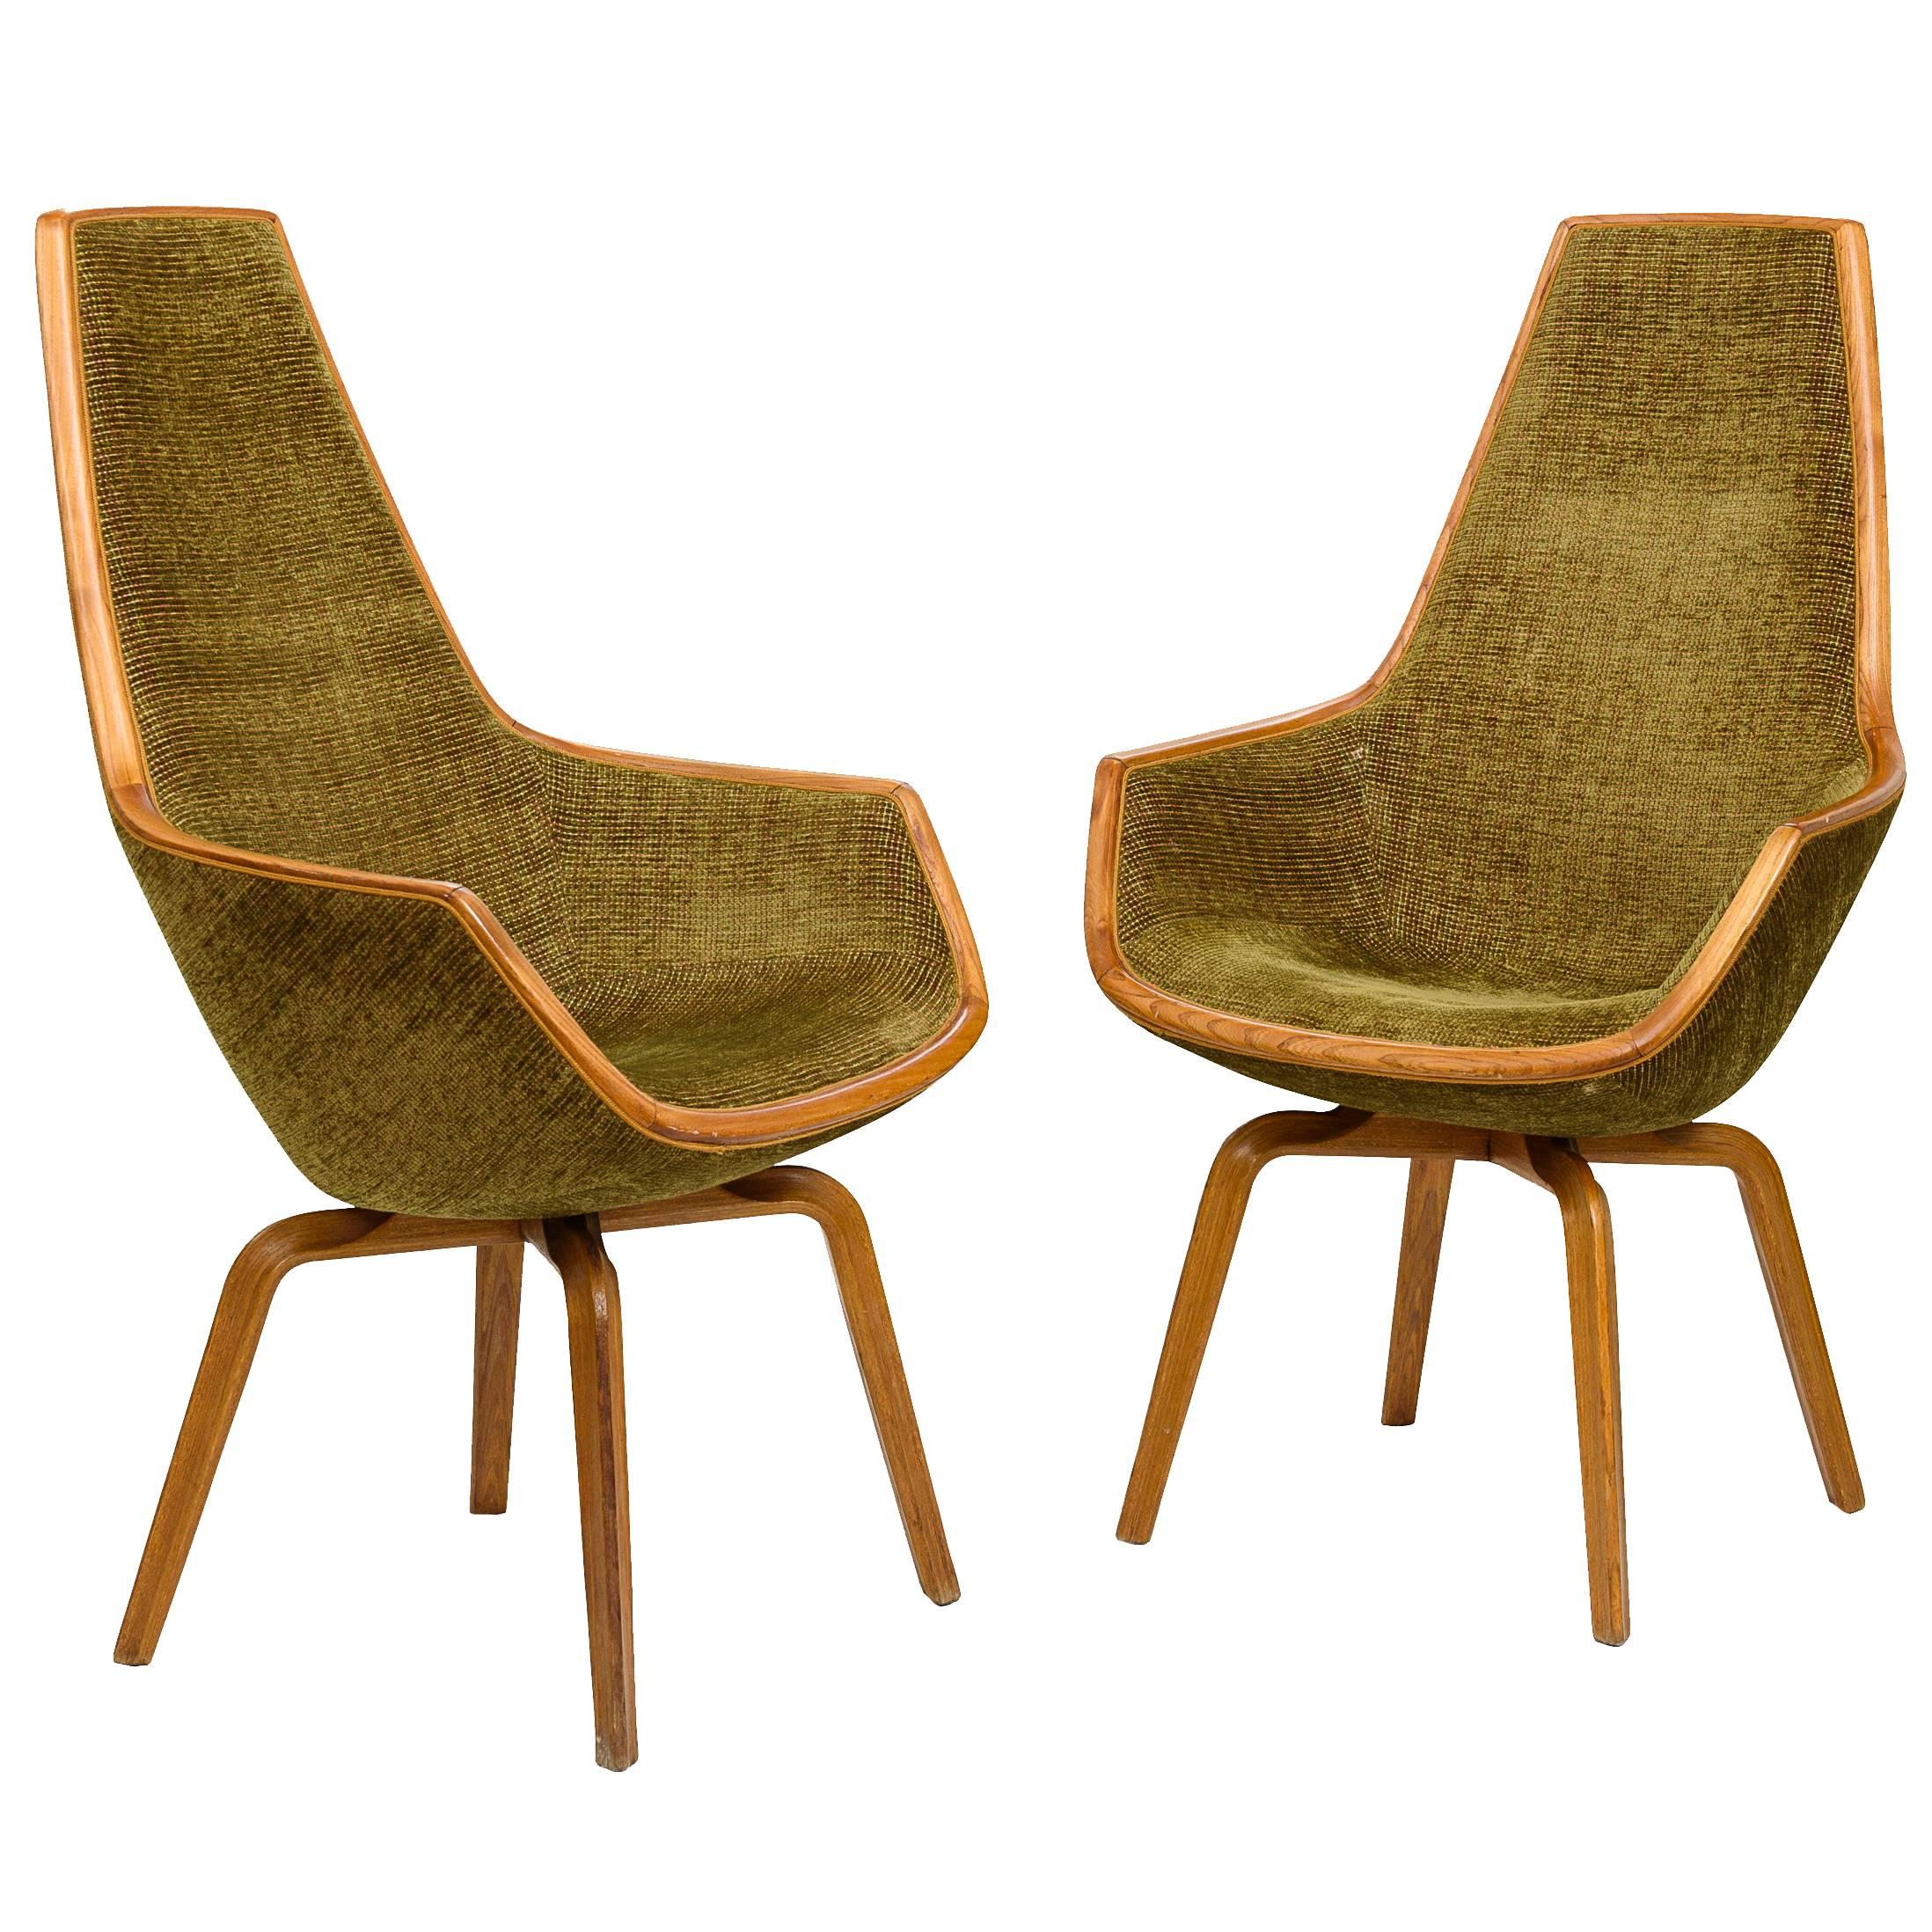 SAS Hotel 'Giraffe' Chairs by Arne Jacobsen For Sale